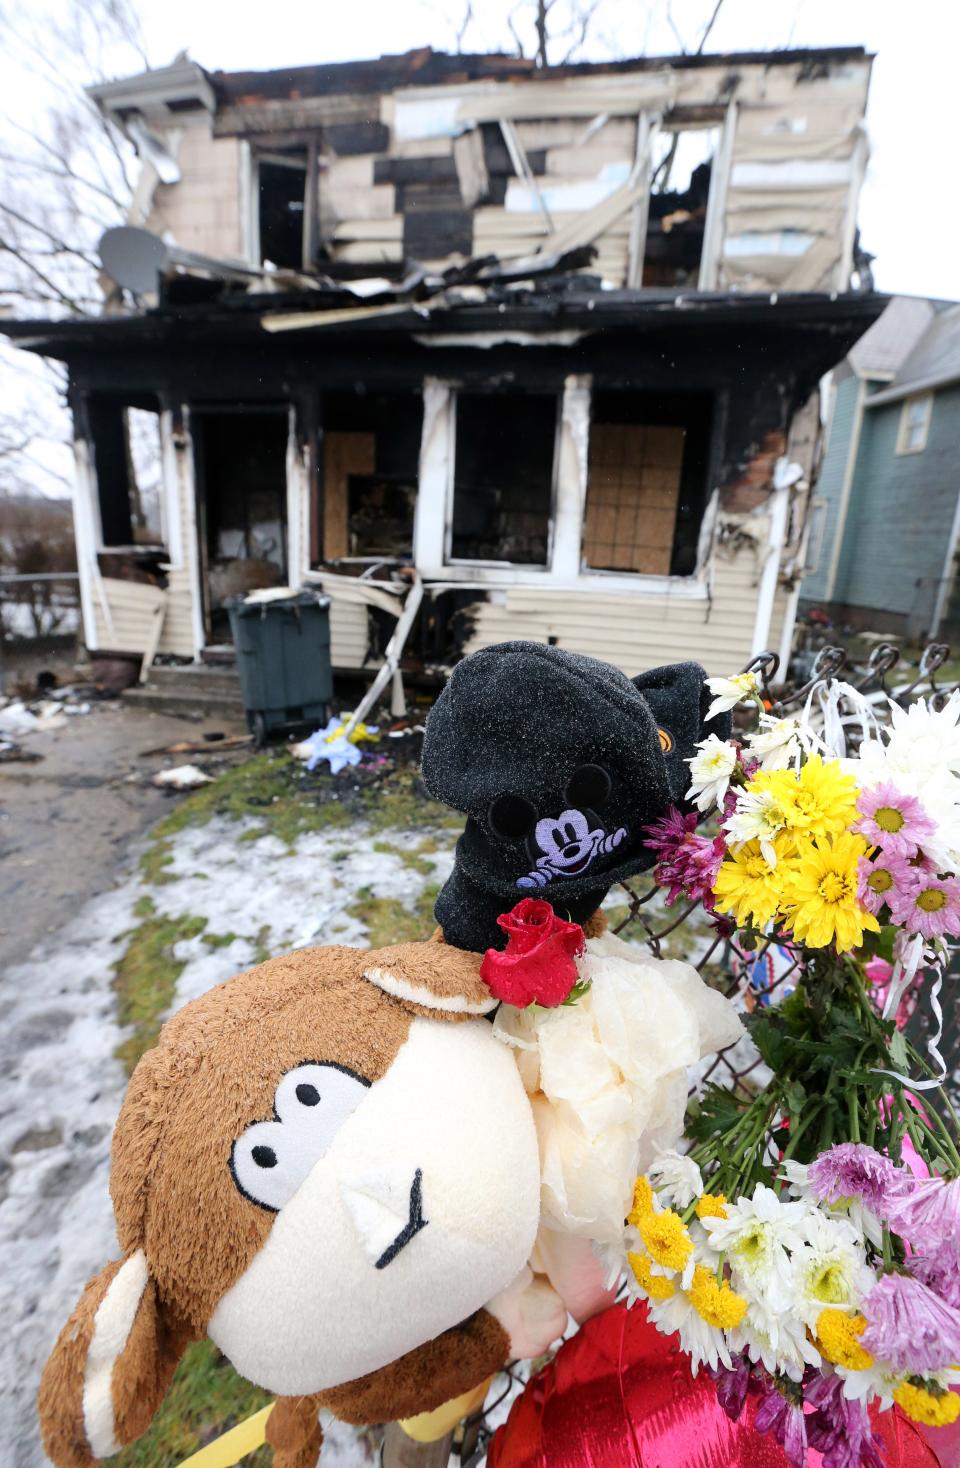 The items left by community members continues to grow Friday, Jan. 26, 2024, at 222 N. LaPorte Ave. where six children died after a house fire Jan. 21, 2024.